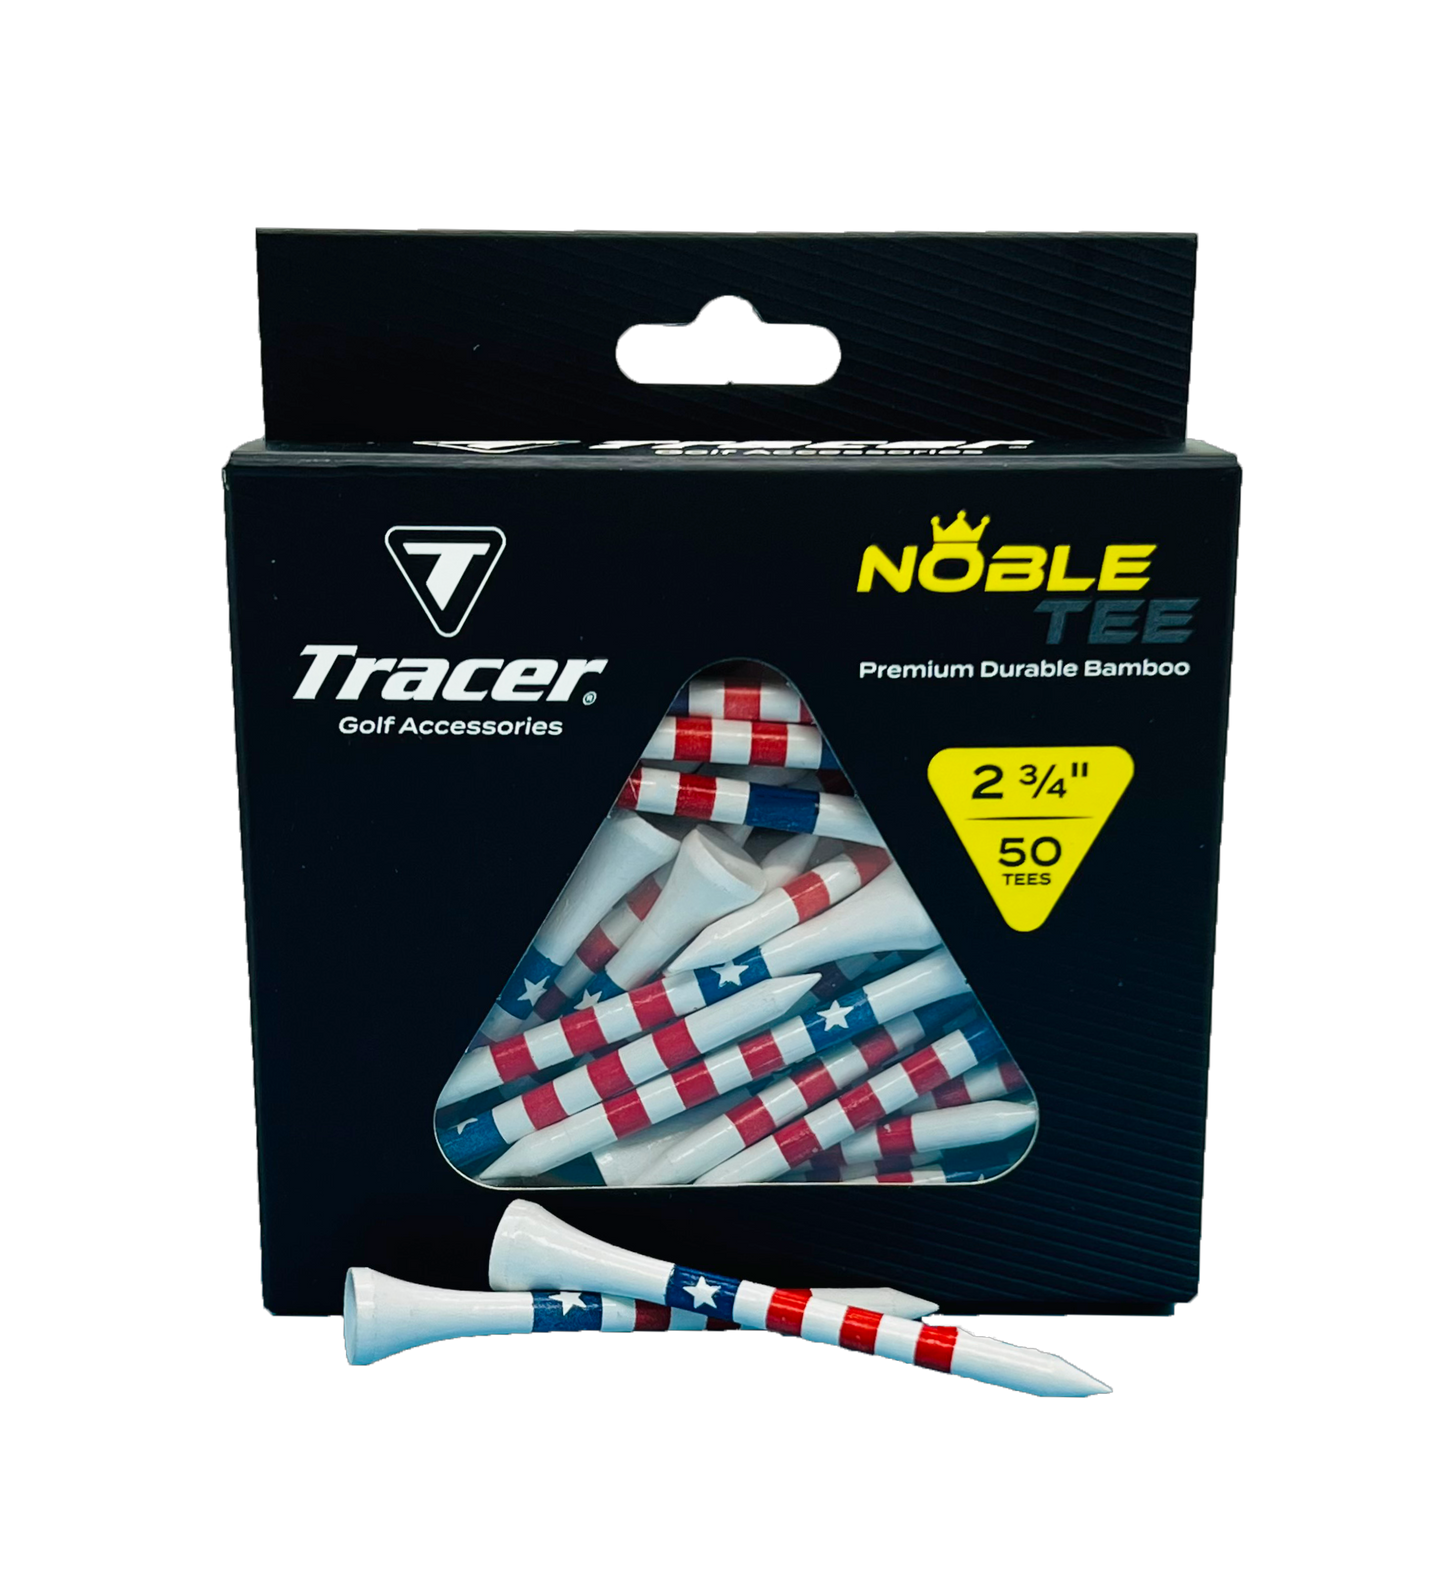 *NEW* Tracer Noble Tees - 2 3/4"